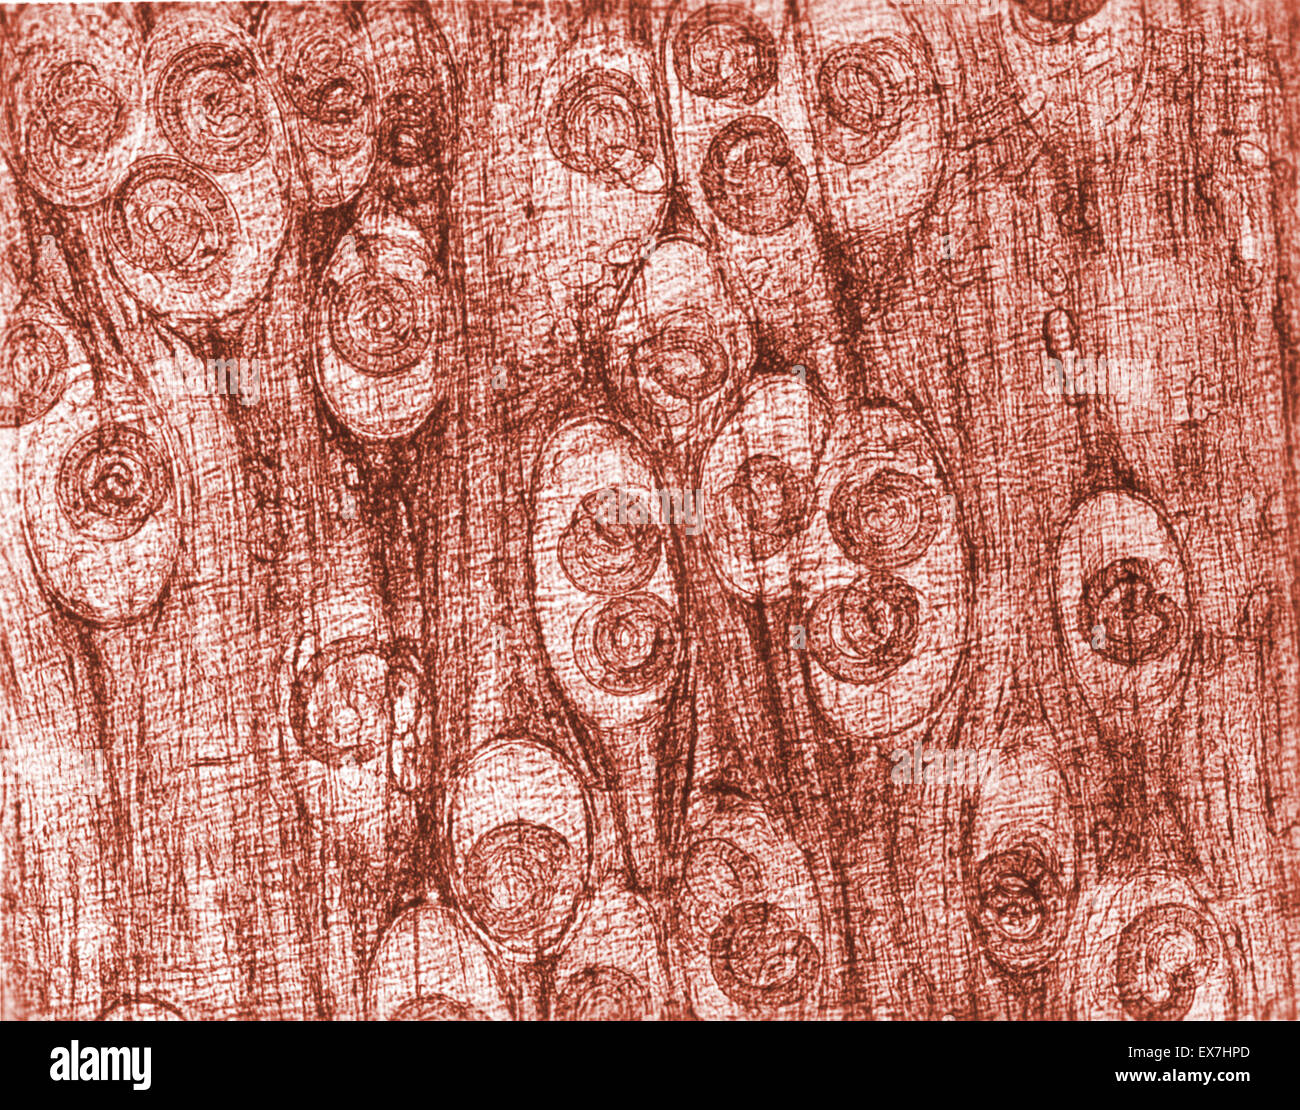 Photomicrograph  of Trichinella spiralis cysts seen embedded in a muscle tissue specimen Stock Photo